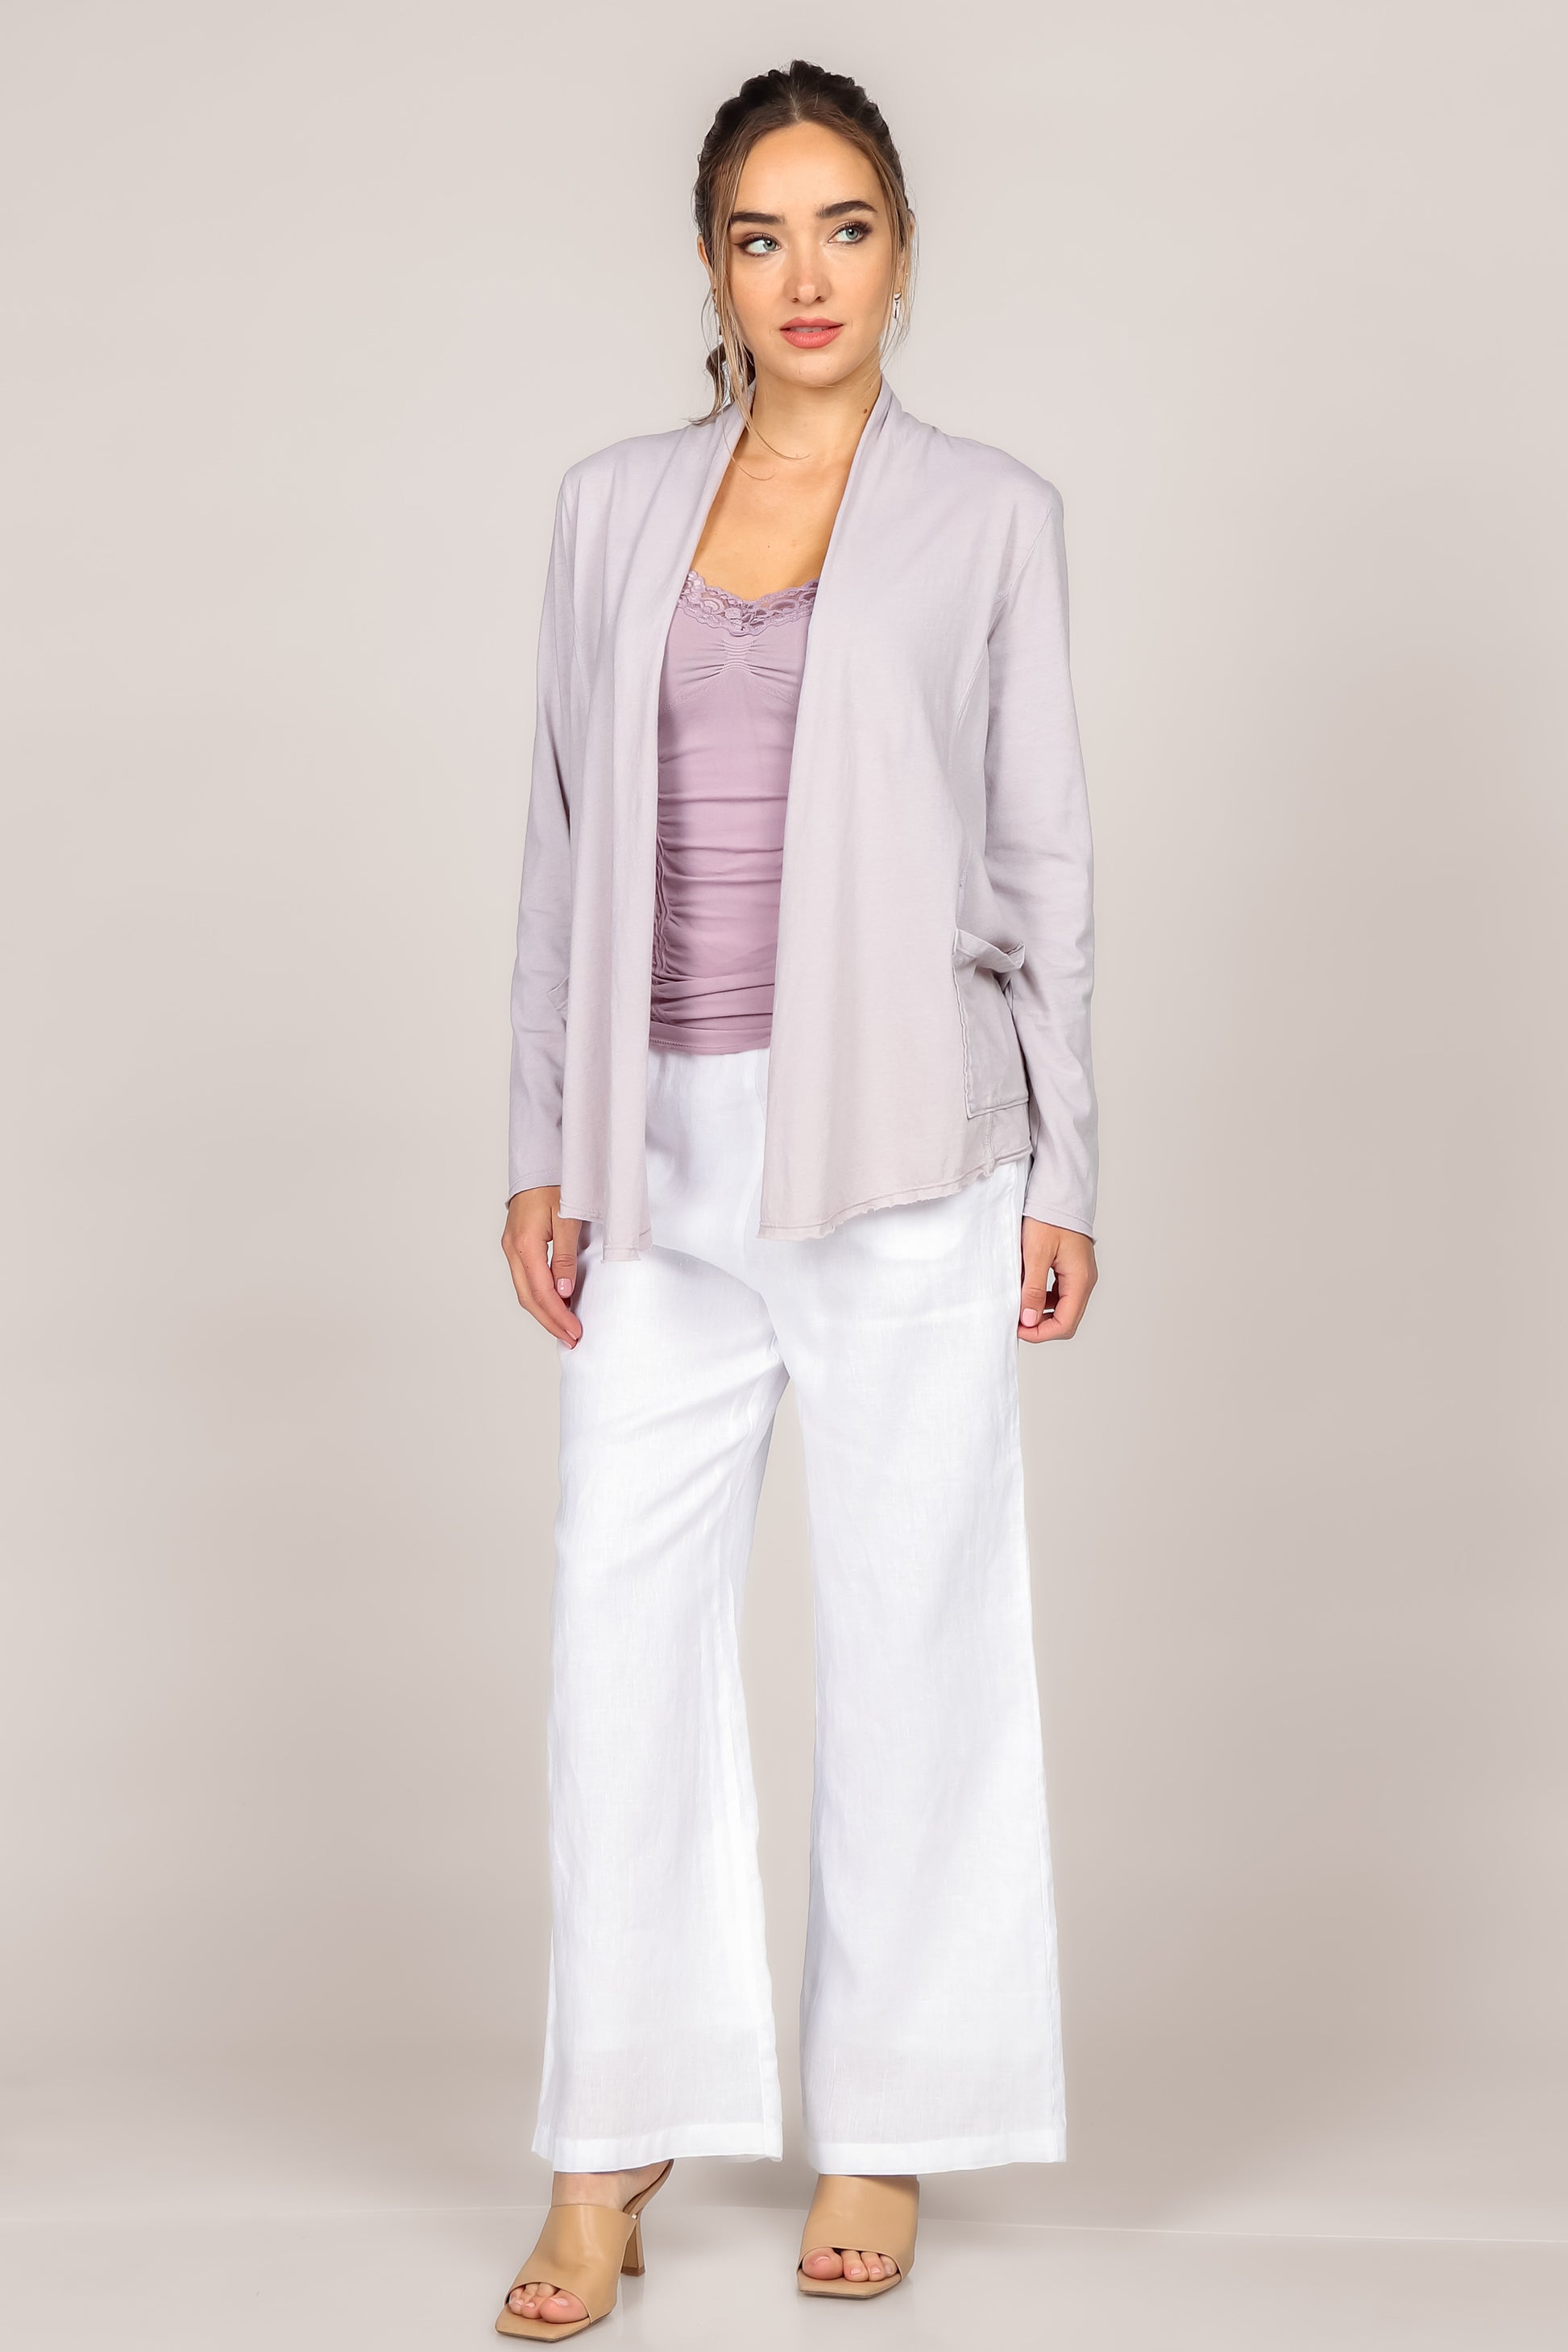 Shop Modal jersey duster and pant set